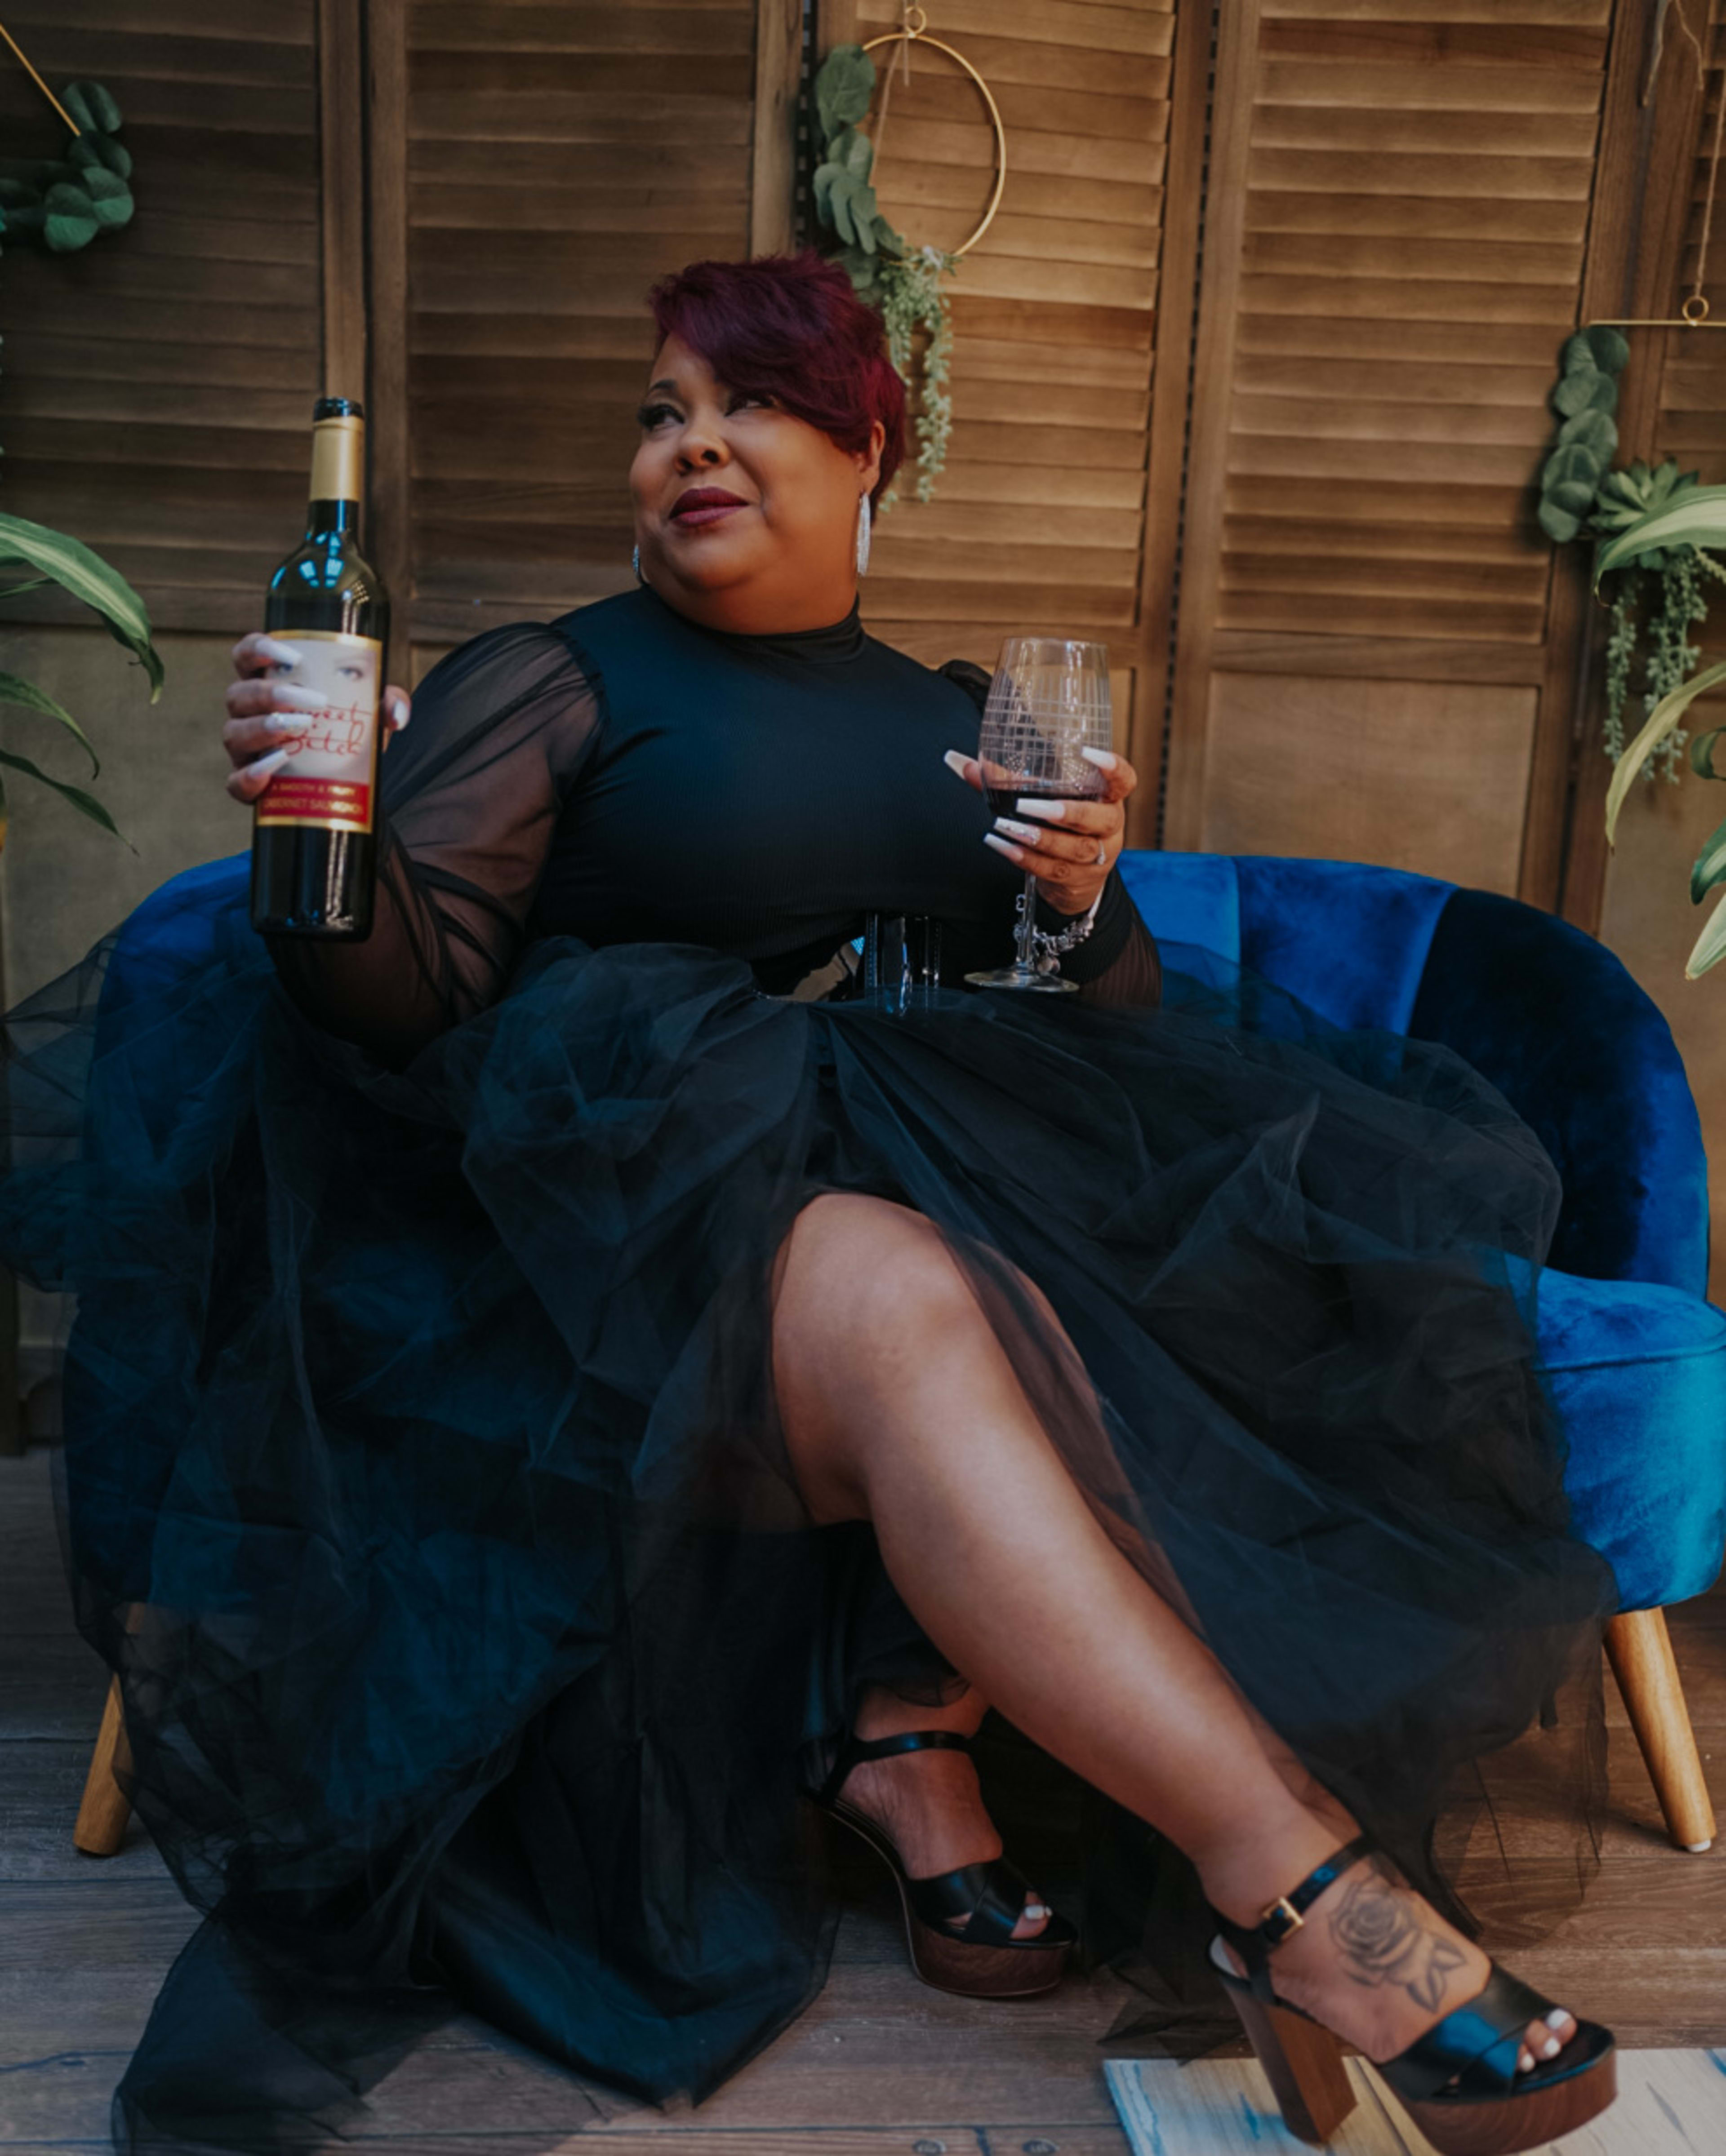 A woman holding a bottle of wine sitting on a blue chair during a photo shoot.